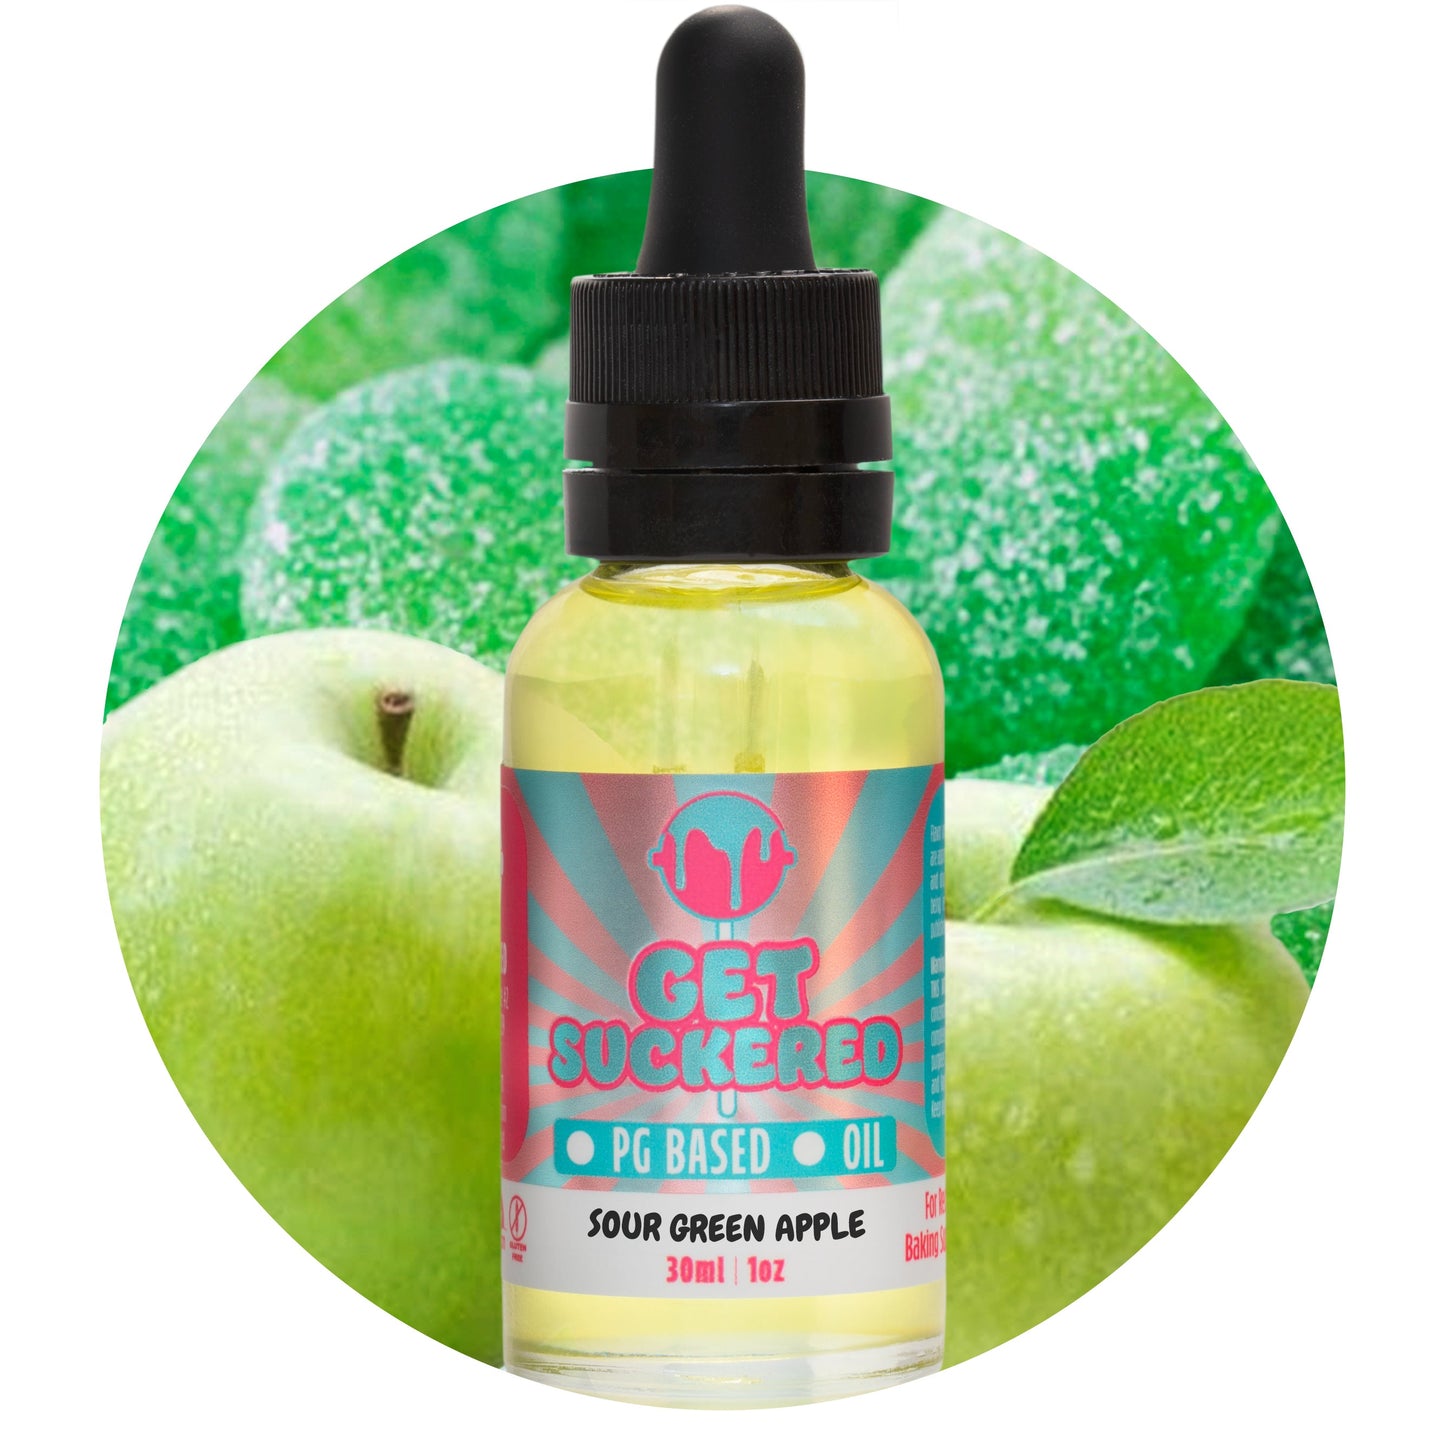 Sour Green Apple Flavoring